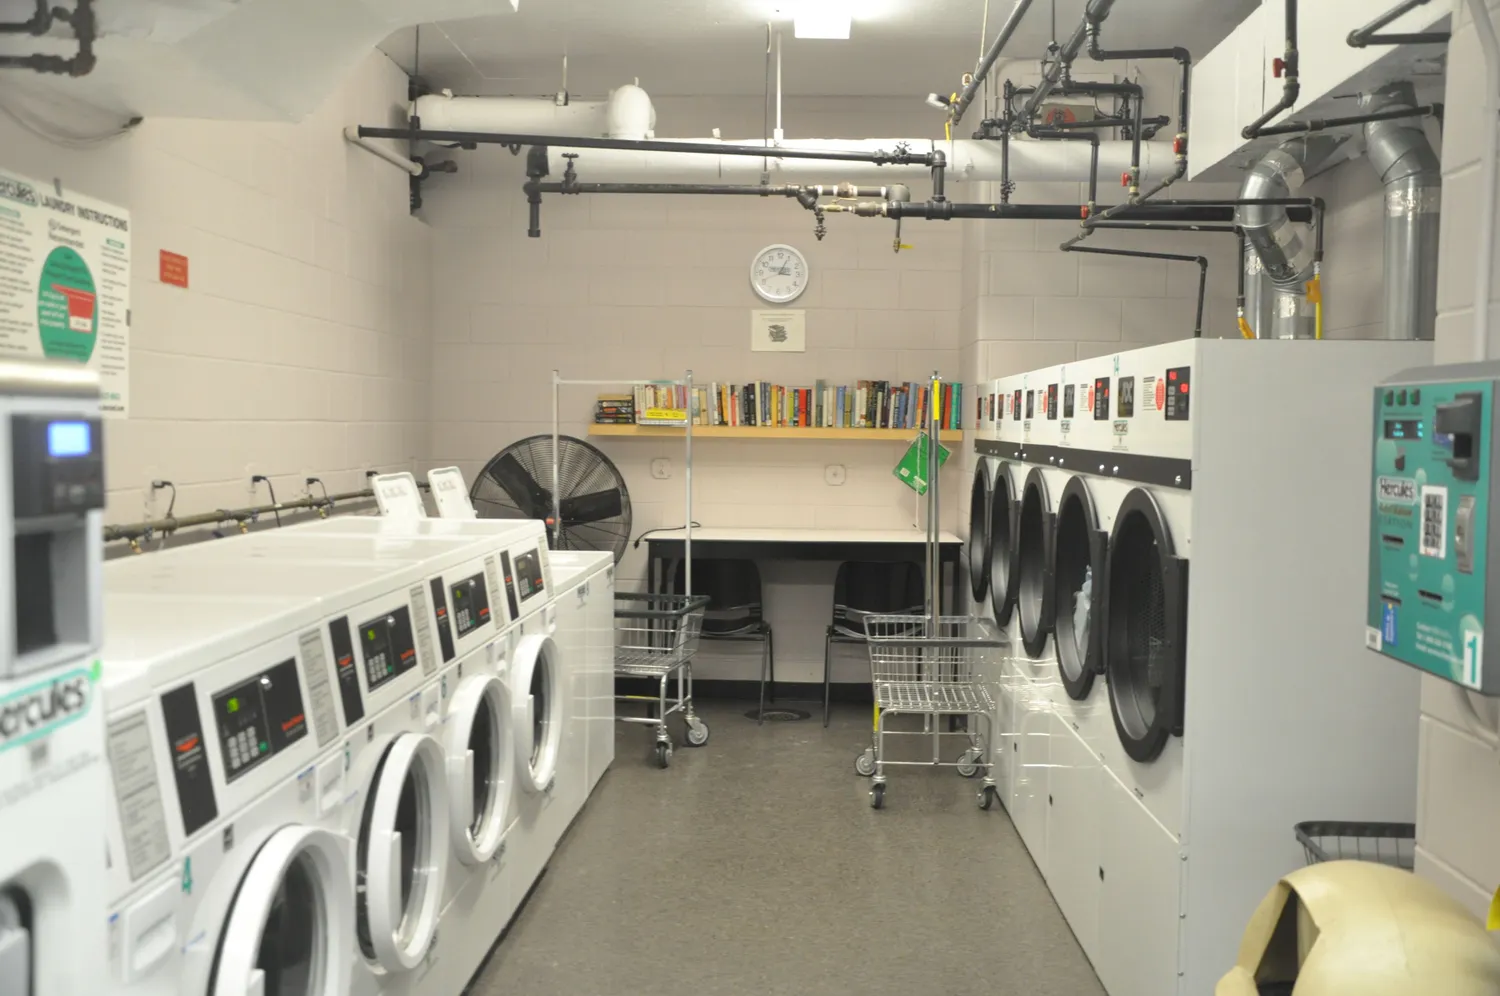 Large and renovated laundry room